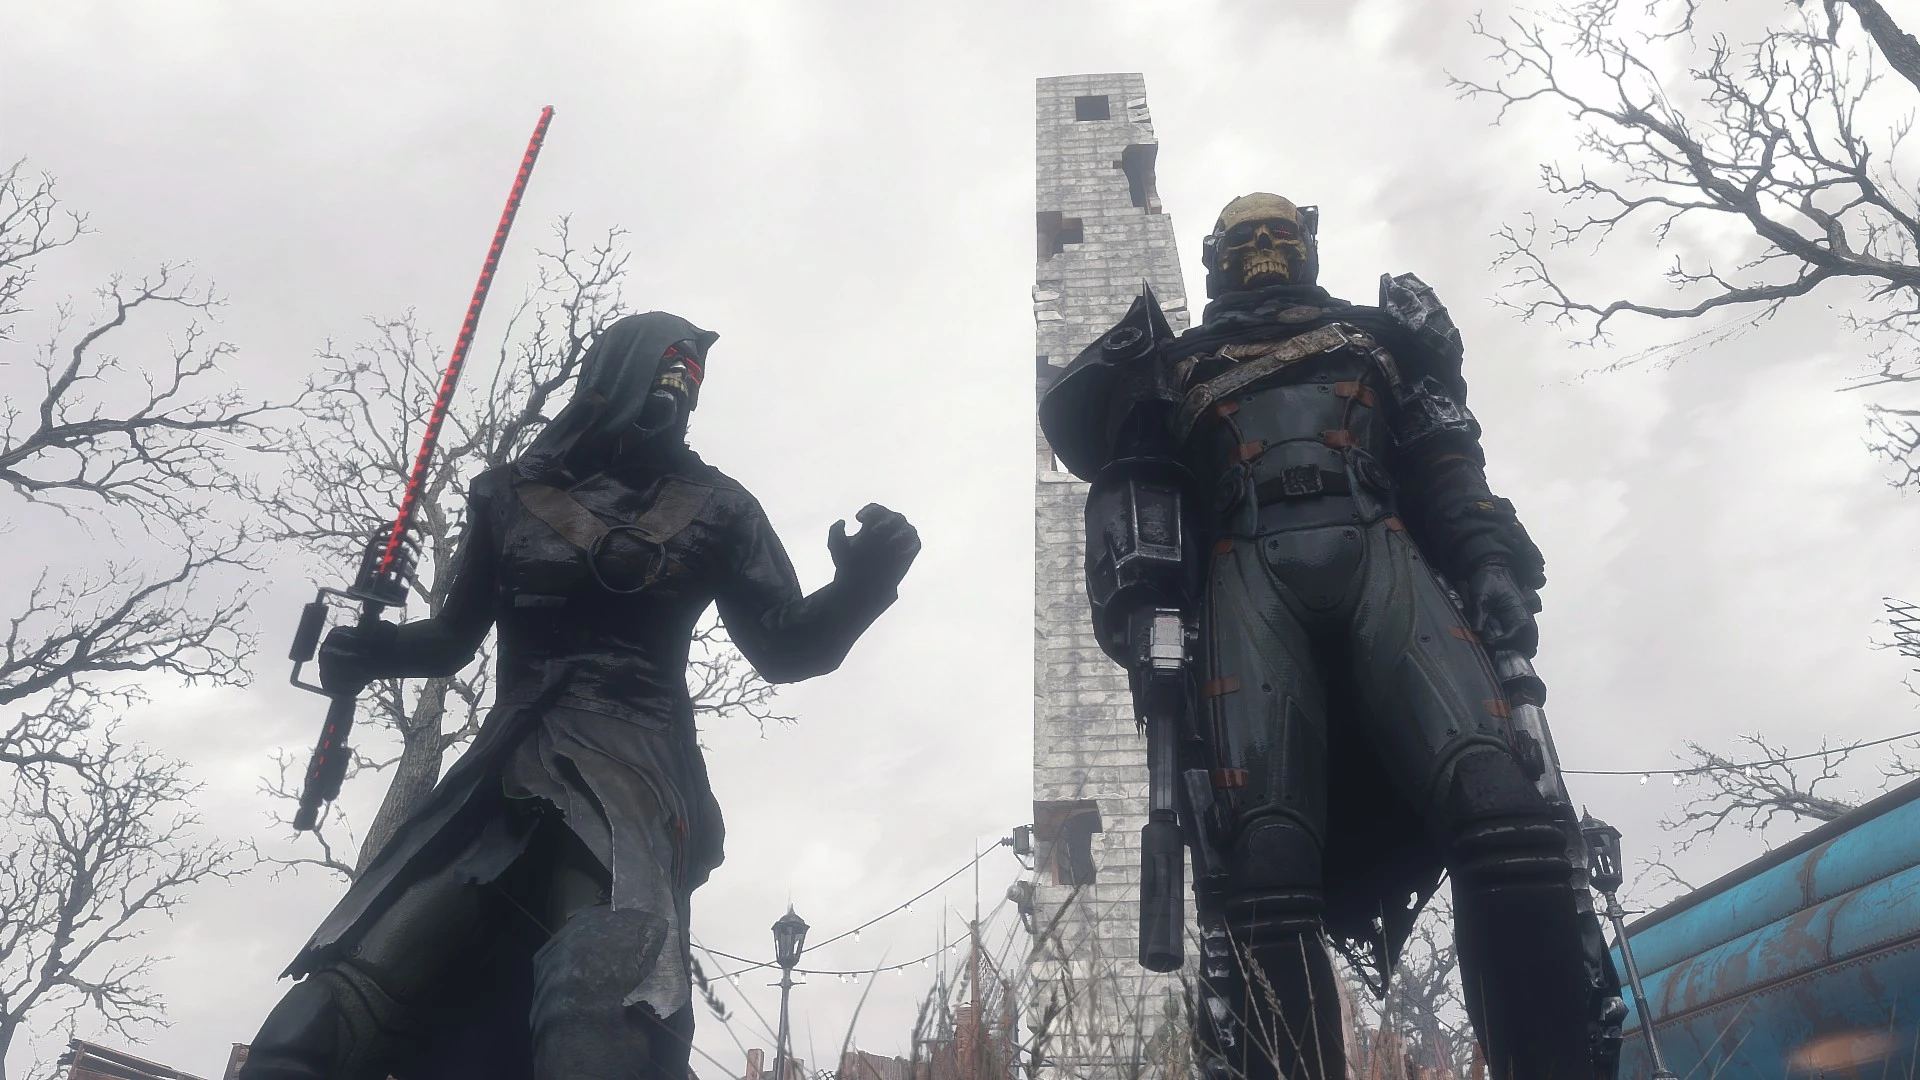 chinese stealth armor fallout 4 mod location